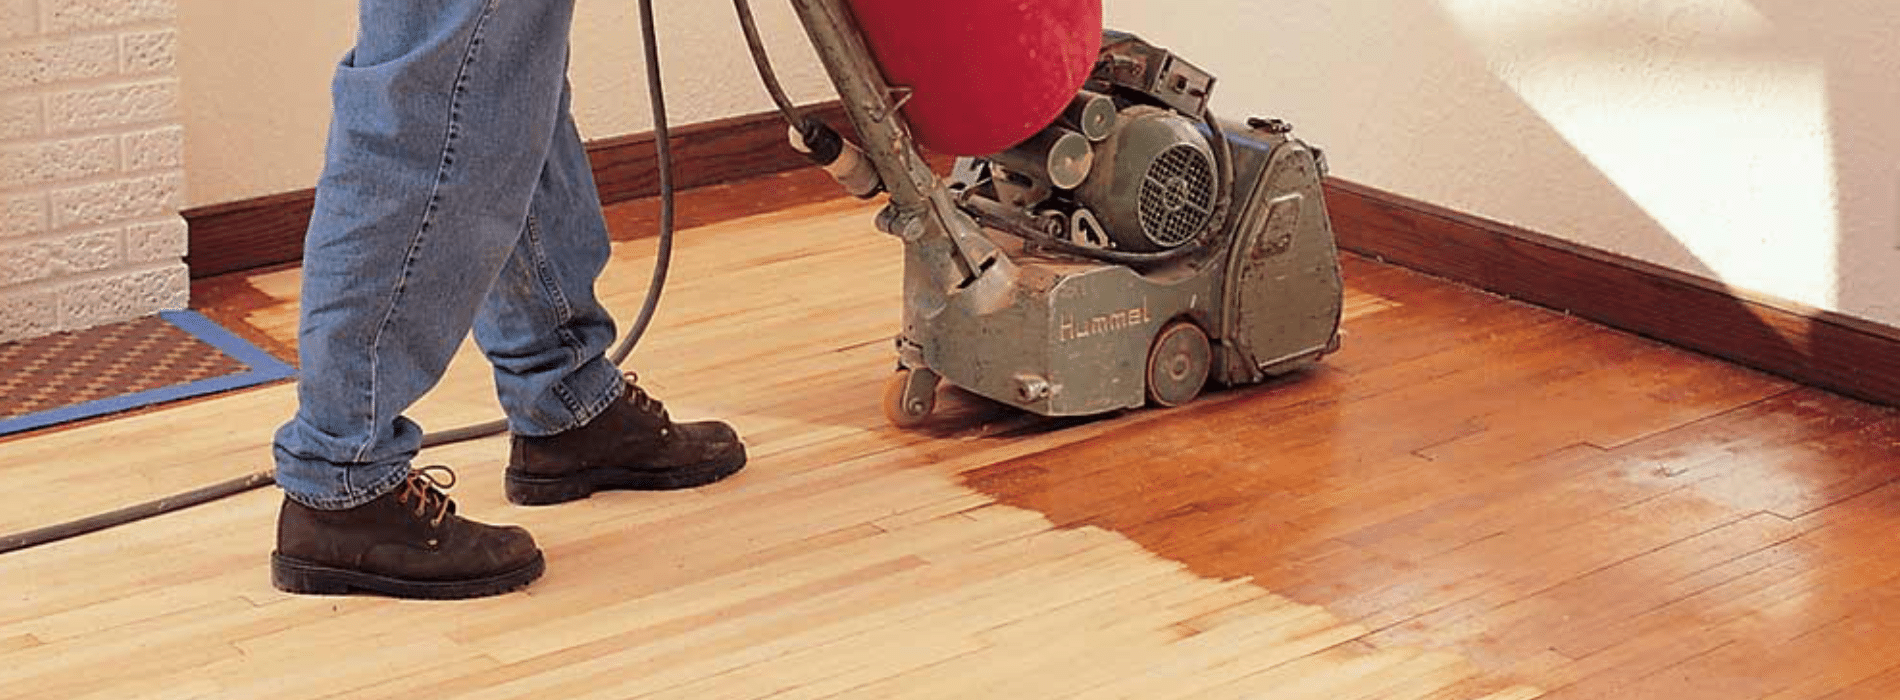 Mr Sander® are using a Bona Scorpion drum sander with a dimension of 200mm, 1.5kW effect, and operating at 240V and 50Hz in Soho, SW1. The sander is connected to a dust extraction system with a HEPA filter, ensuring a clean and efficient sanding process for parquet floors.